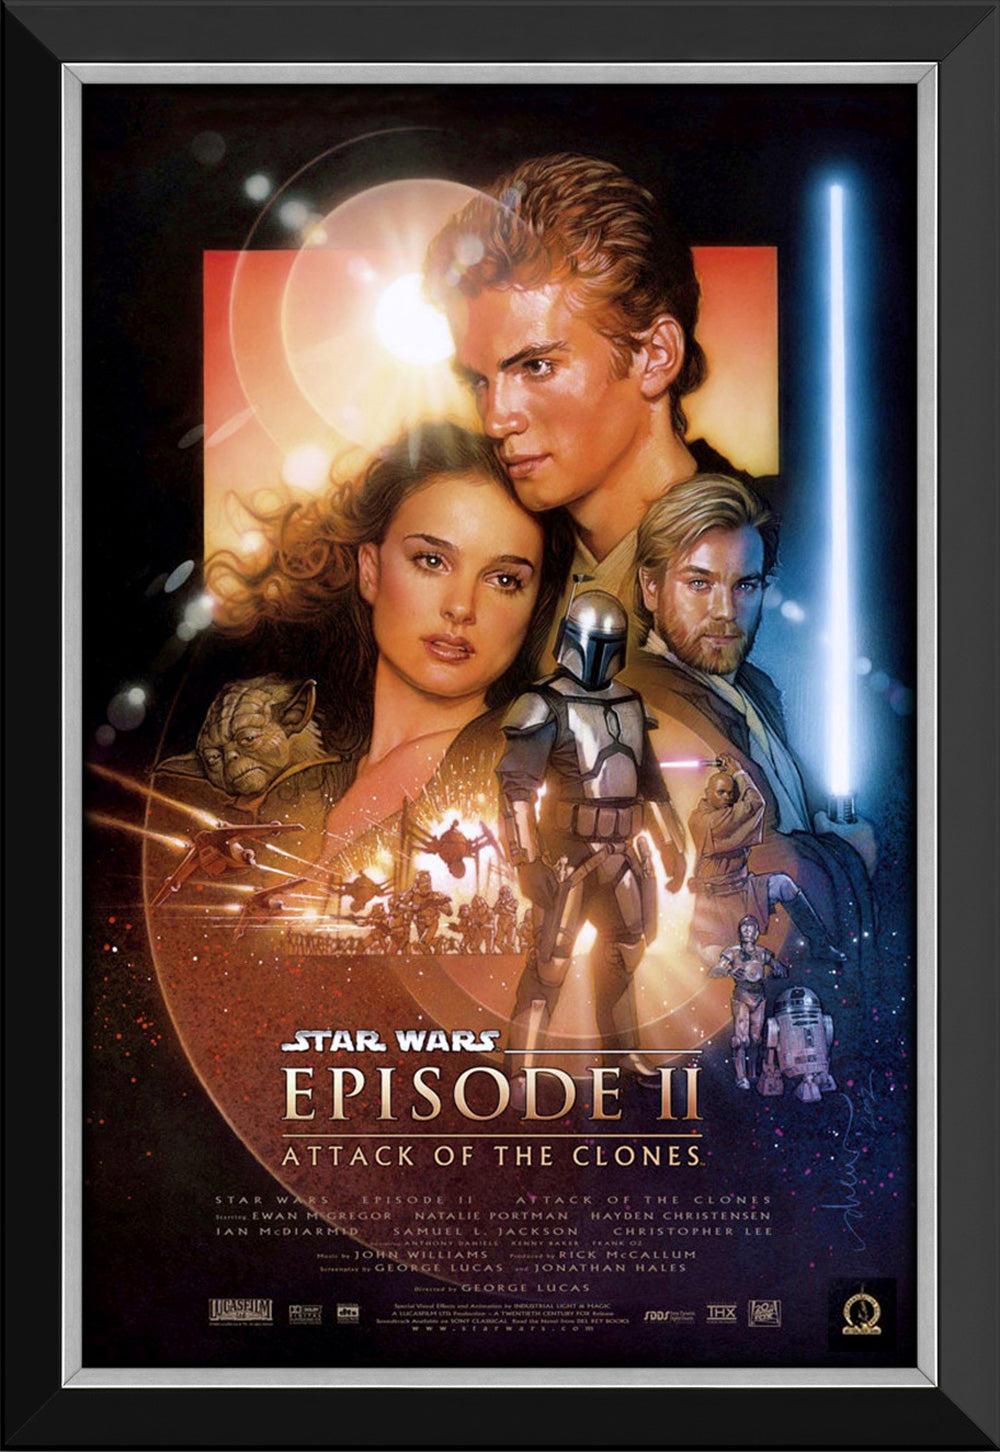 Star Wars Ep Ii Attack Of The Clones - Movie Poster Reprint Framed Classic, Star Wars, Pop Culture Art, Movies, Collectibile Memorabilia, AAAPM32605